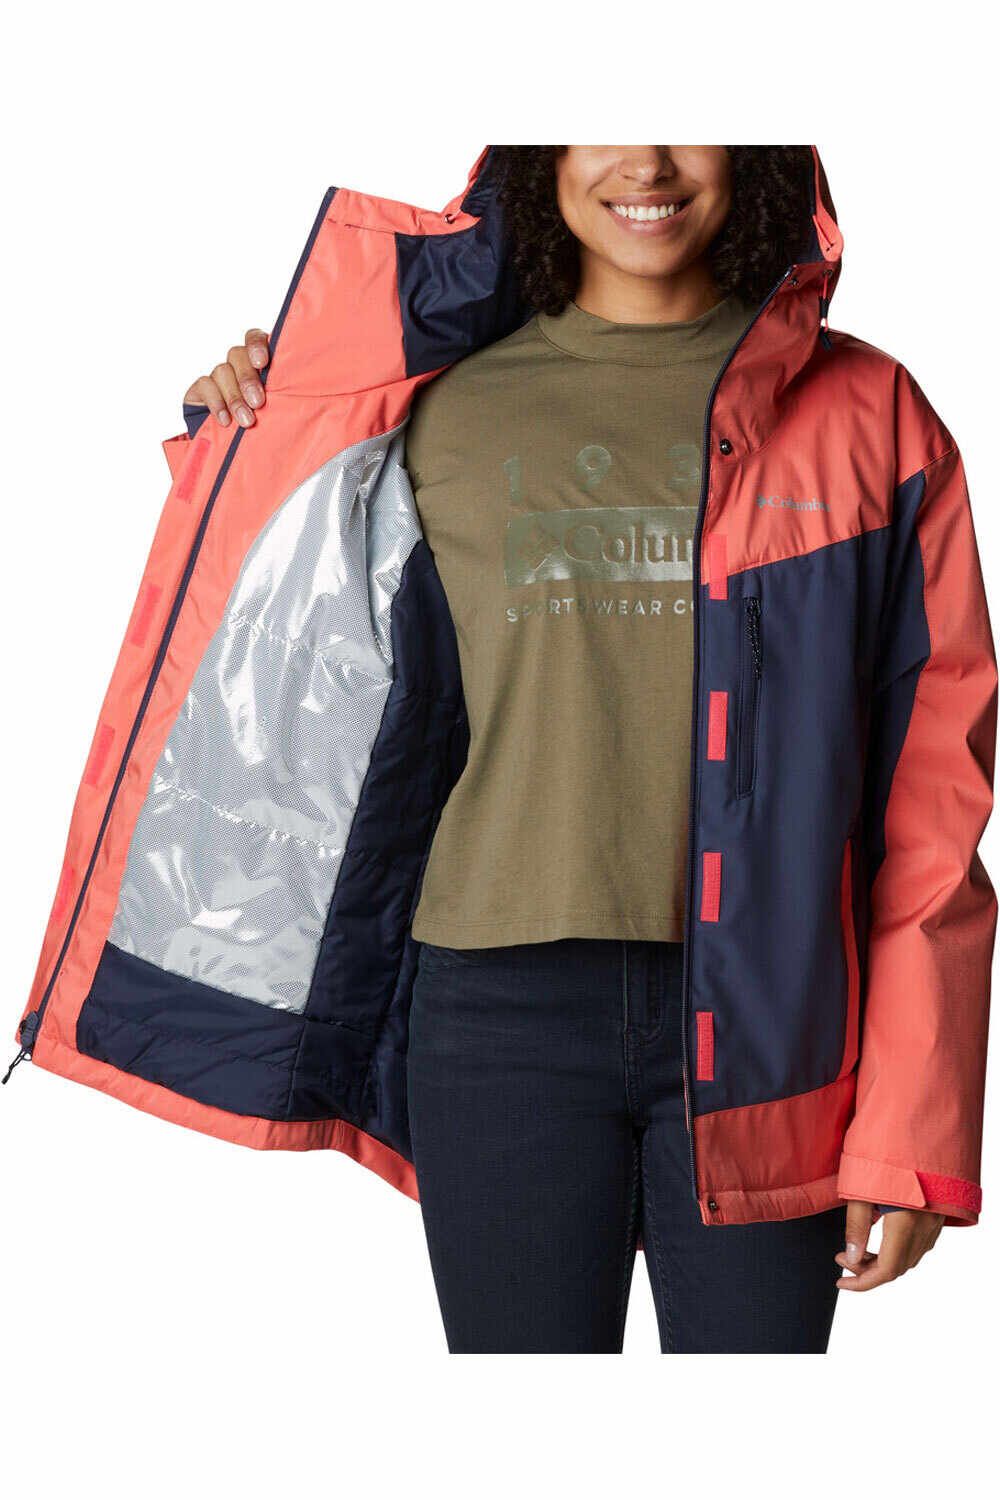 Columbia Point Park Insulated Chaqueta Outdoor Mujer Negro (XS)